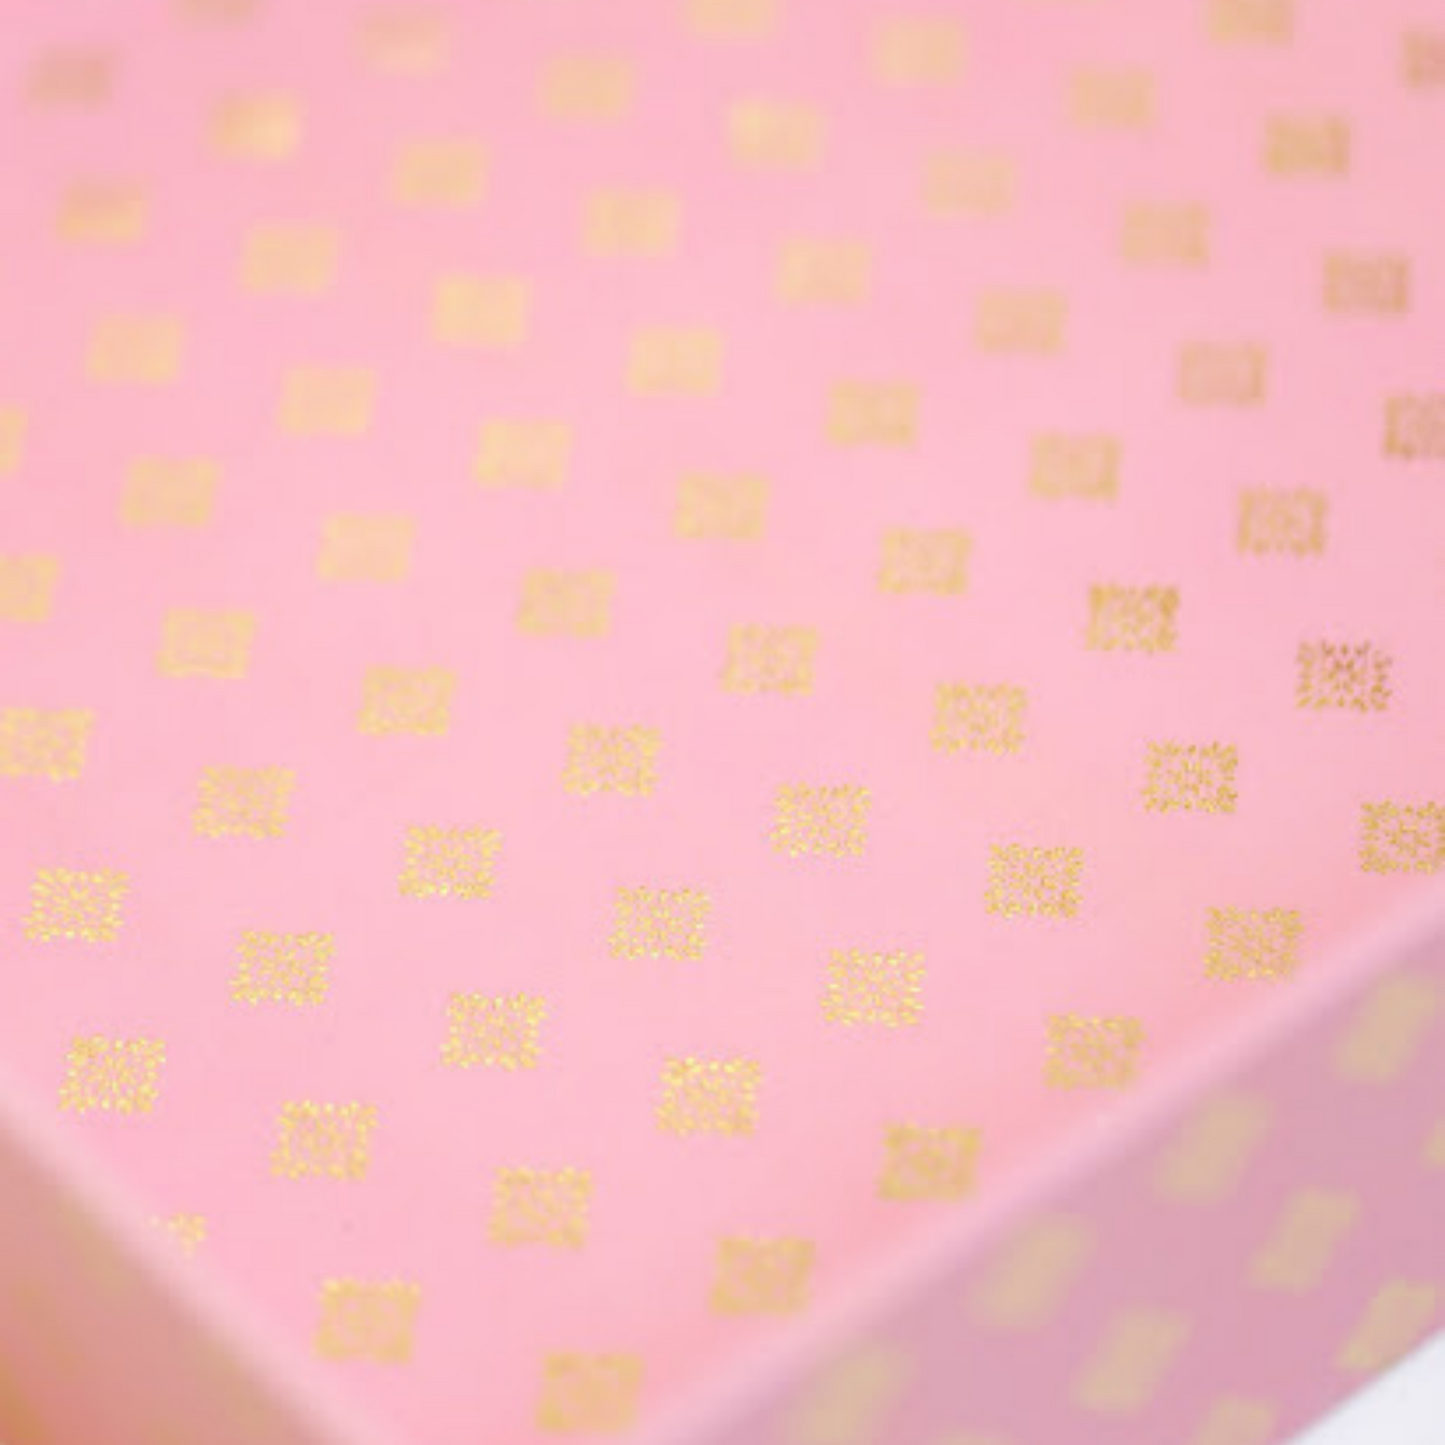 gifting trays in pink